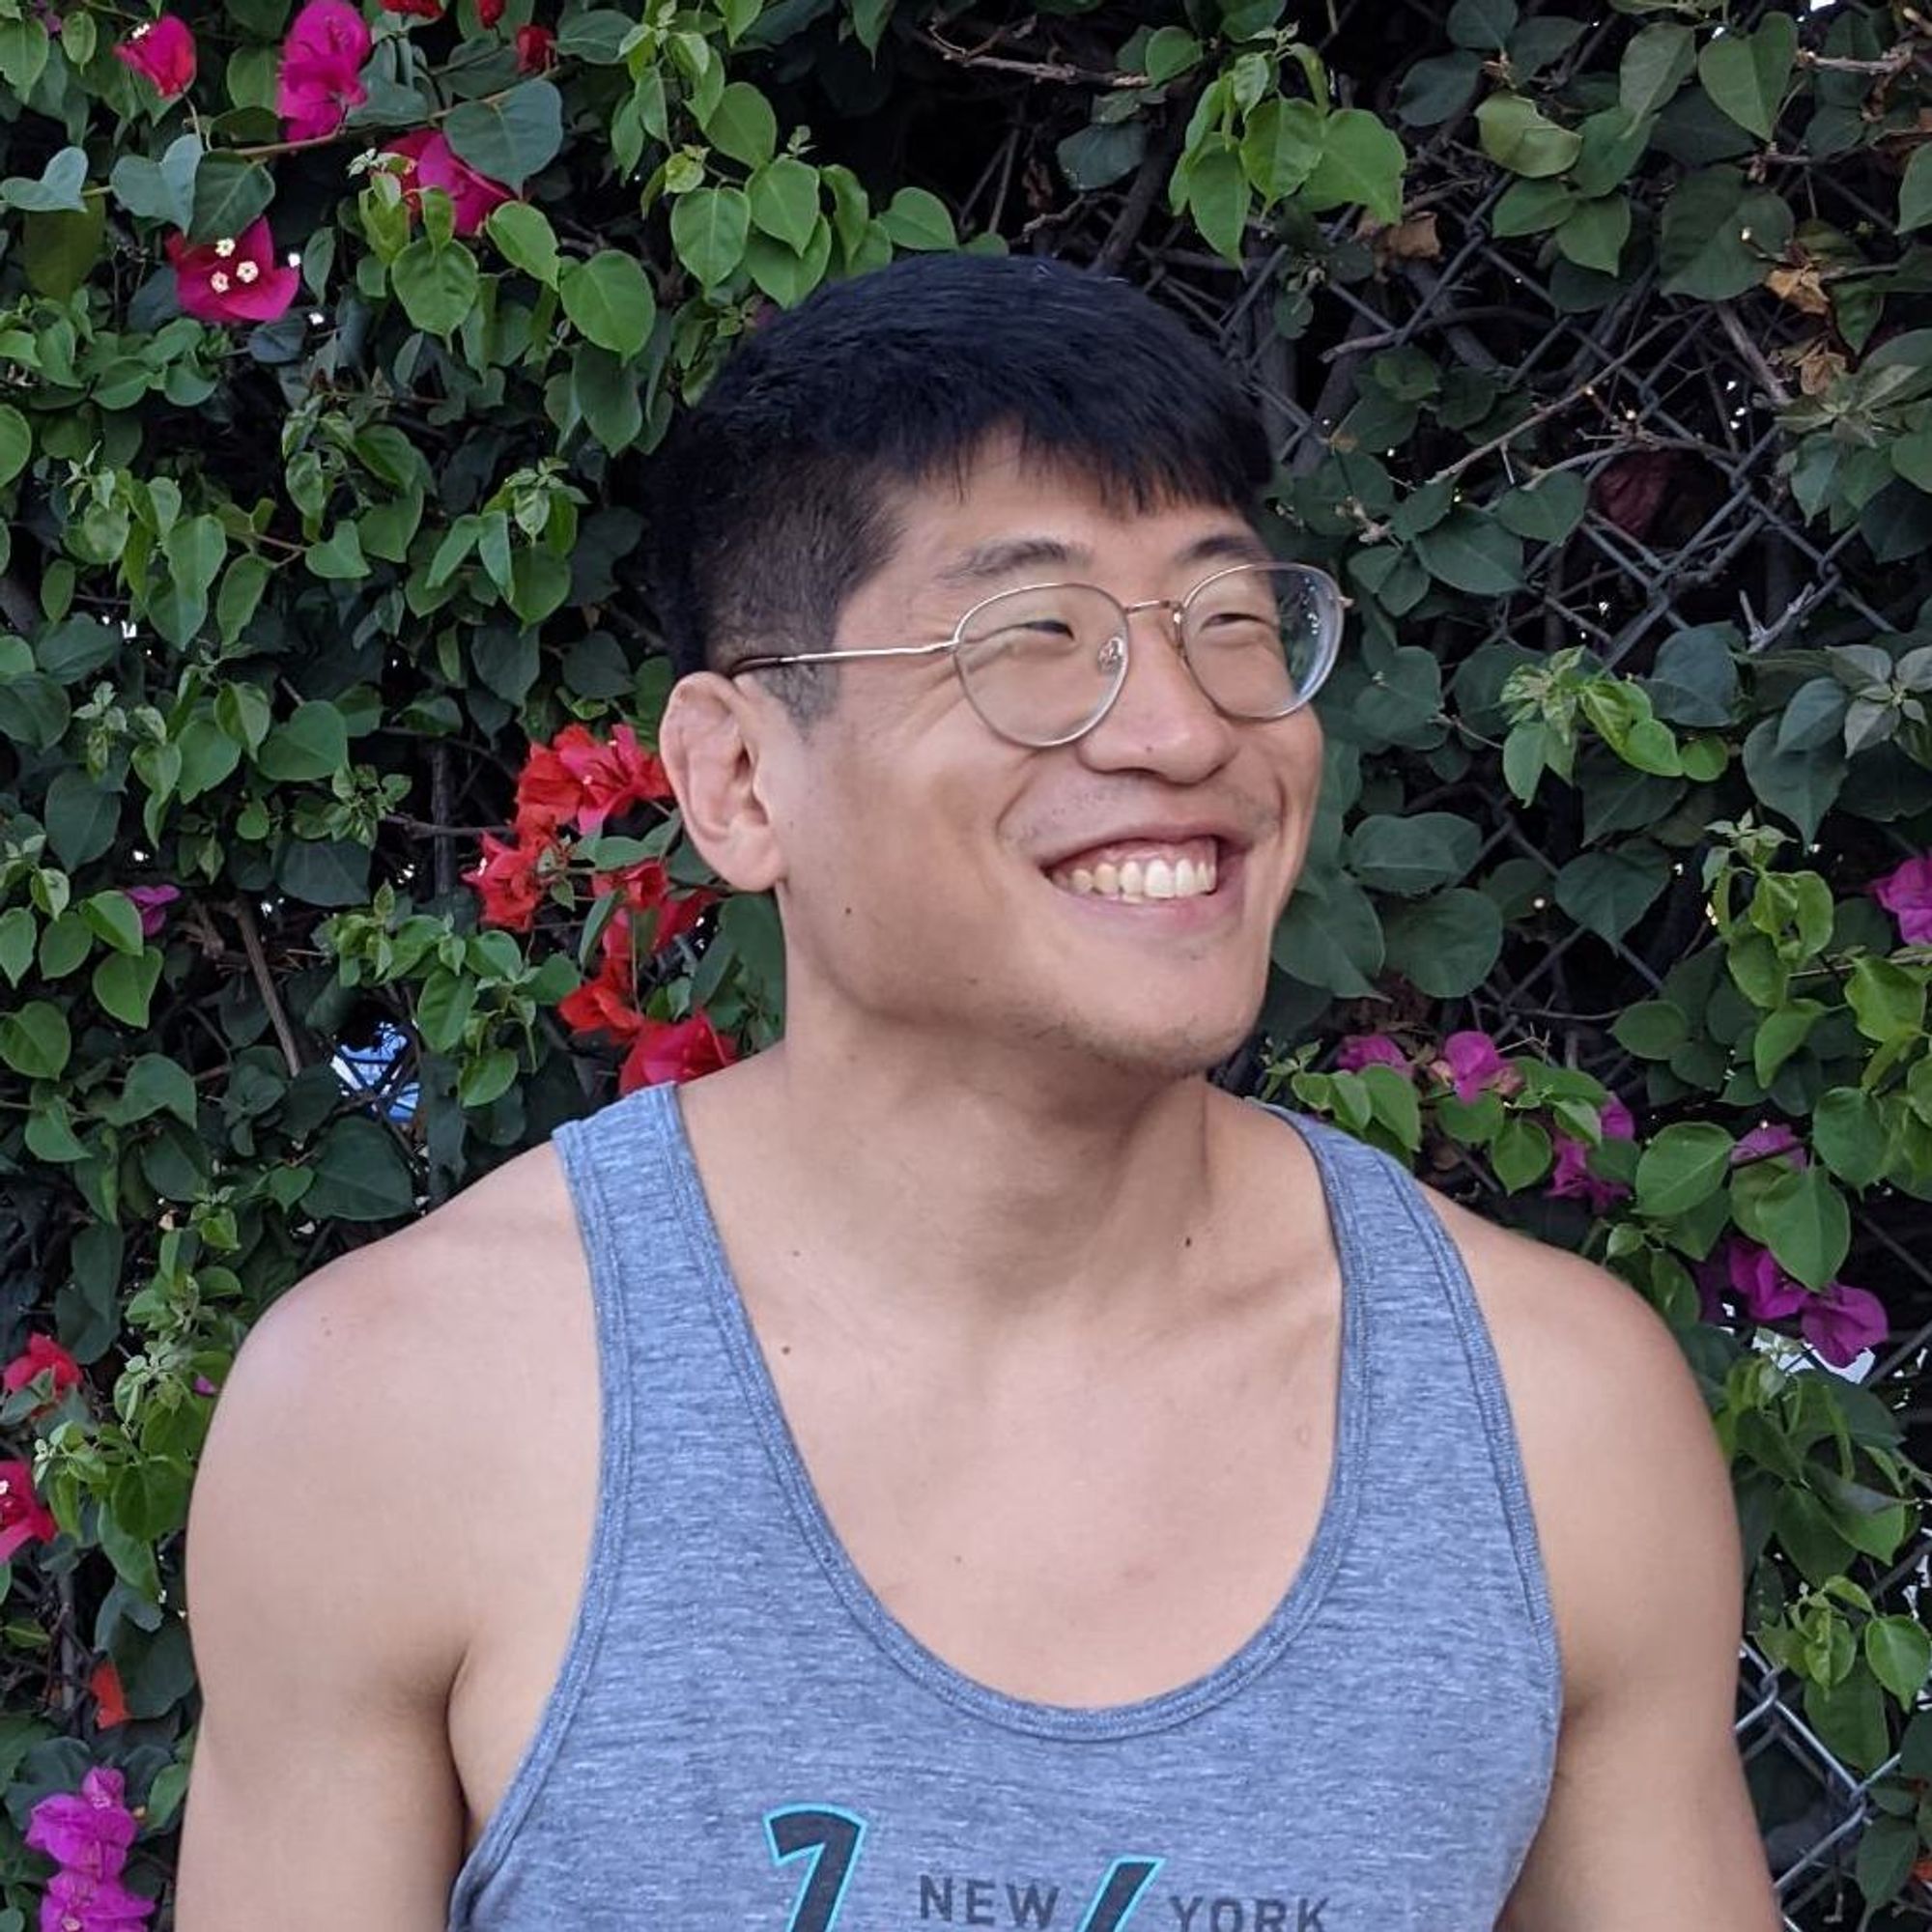 Andrew Kim
Technical Support Engineer
Prior Enterprise Sales Engineer & Sr. Support Engineer @Intercom • Loves competing and teaching brazilian jiu jitsu, and asking probing questions about people's food preferences